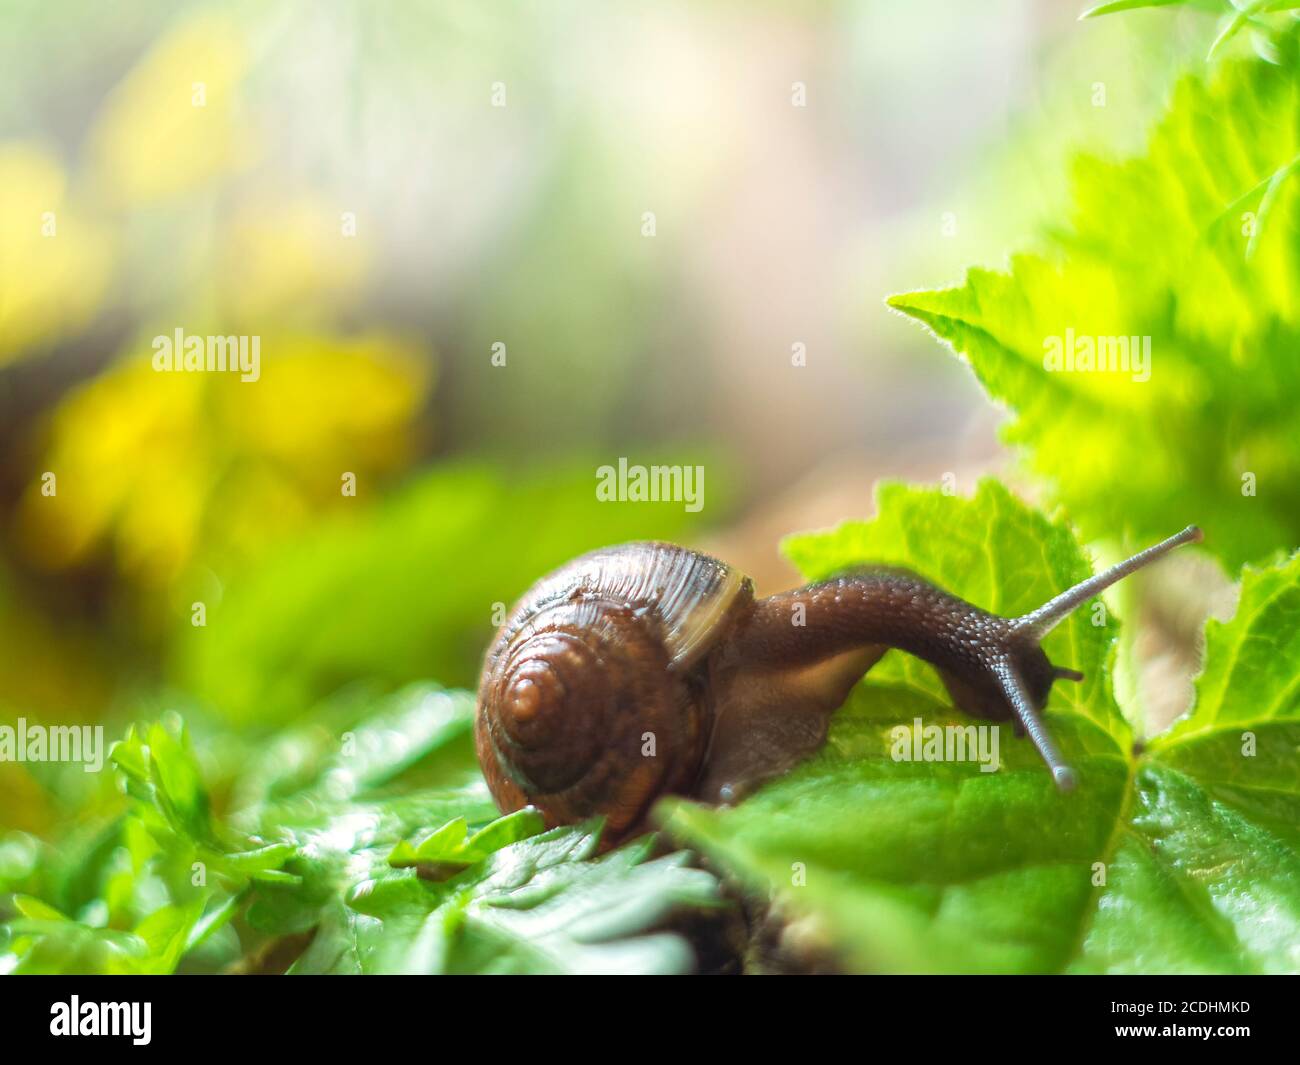 Snail gliding on the wet leaves in the garden. Snail close up. Nature life concept. Selective focus Stock Photo